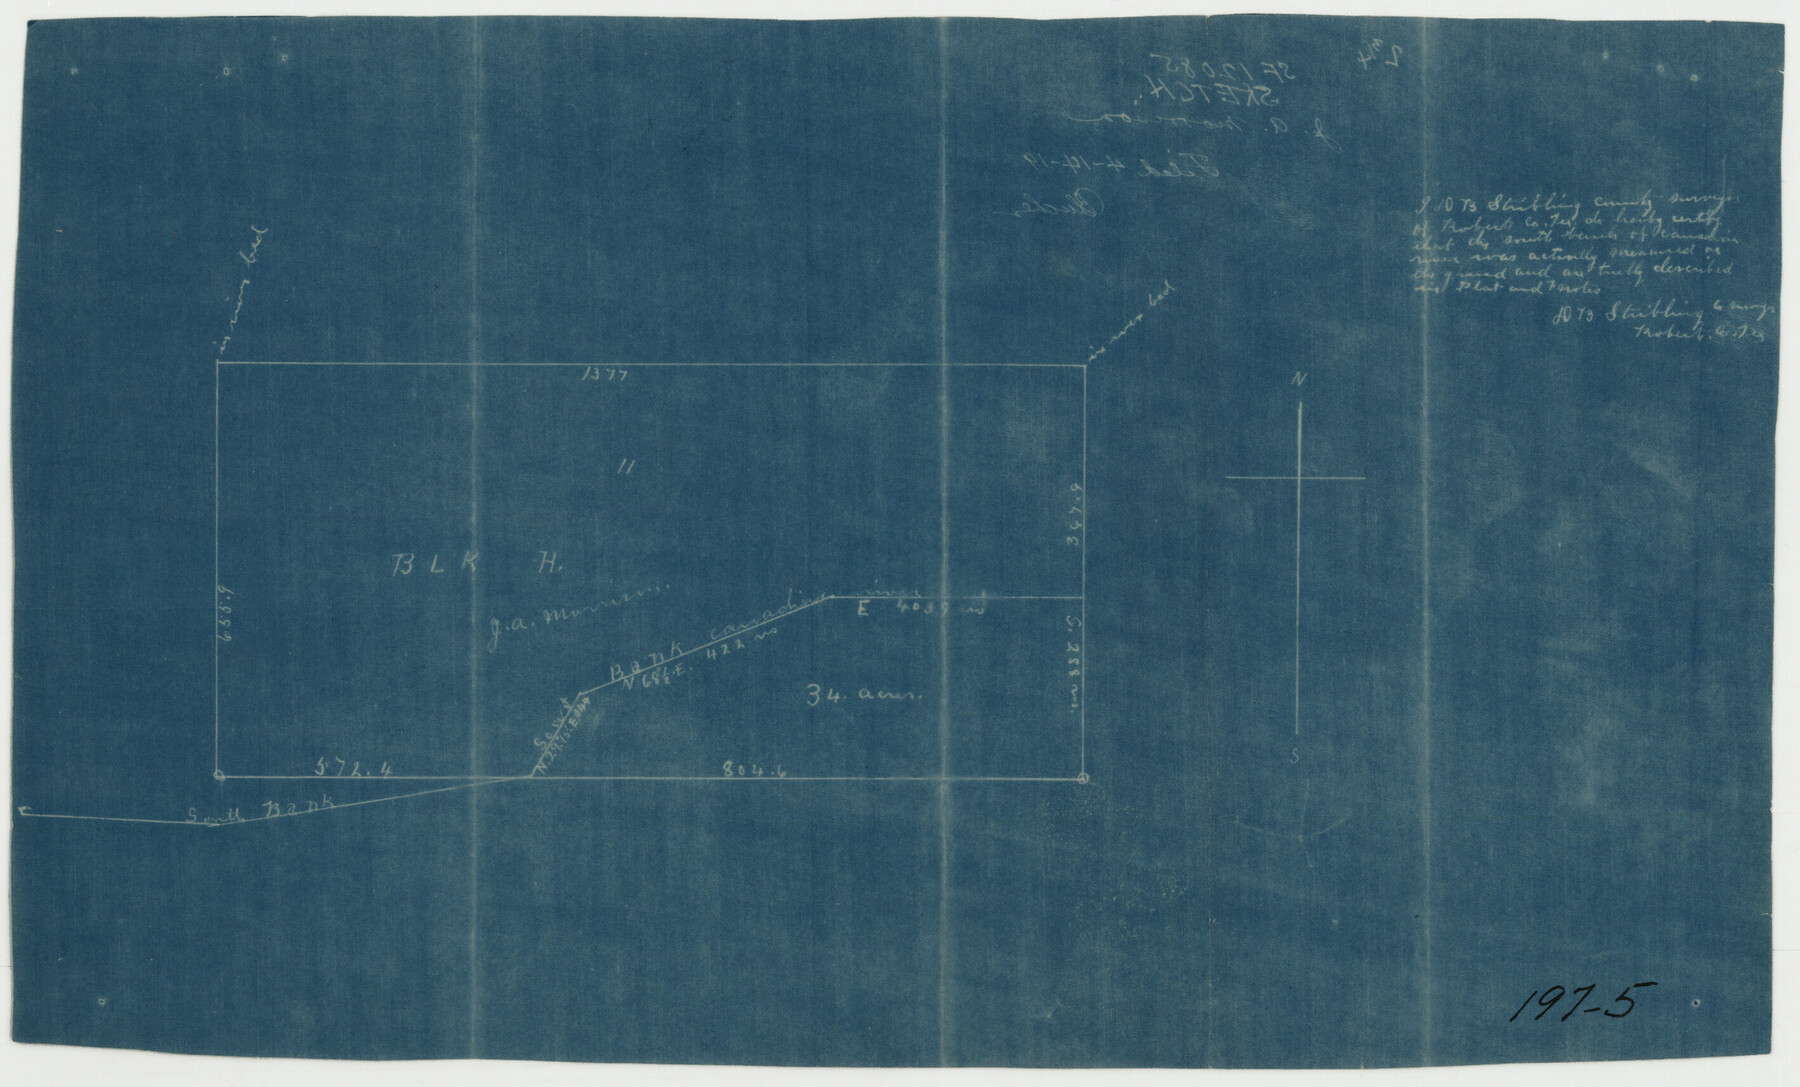 91761, [Sketch showing Block H, Section 11 of Roberts County, including the south bank of the Canadian River], Twichell Survey Records